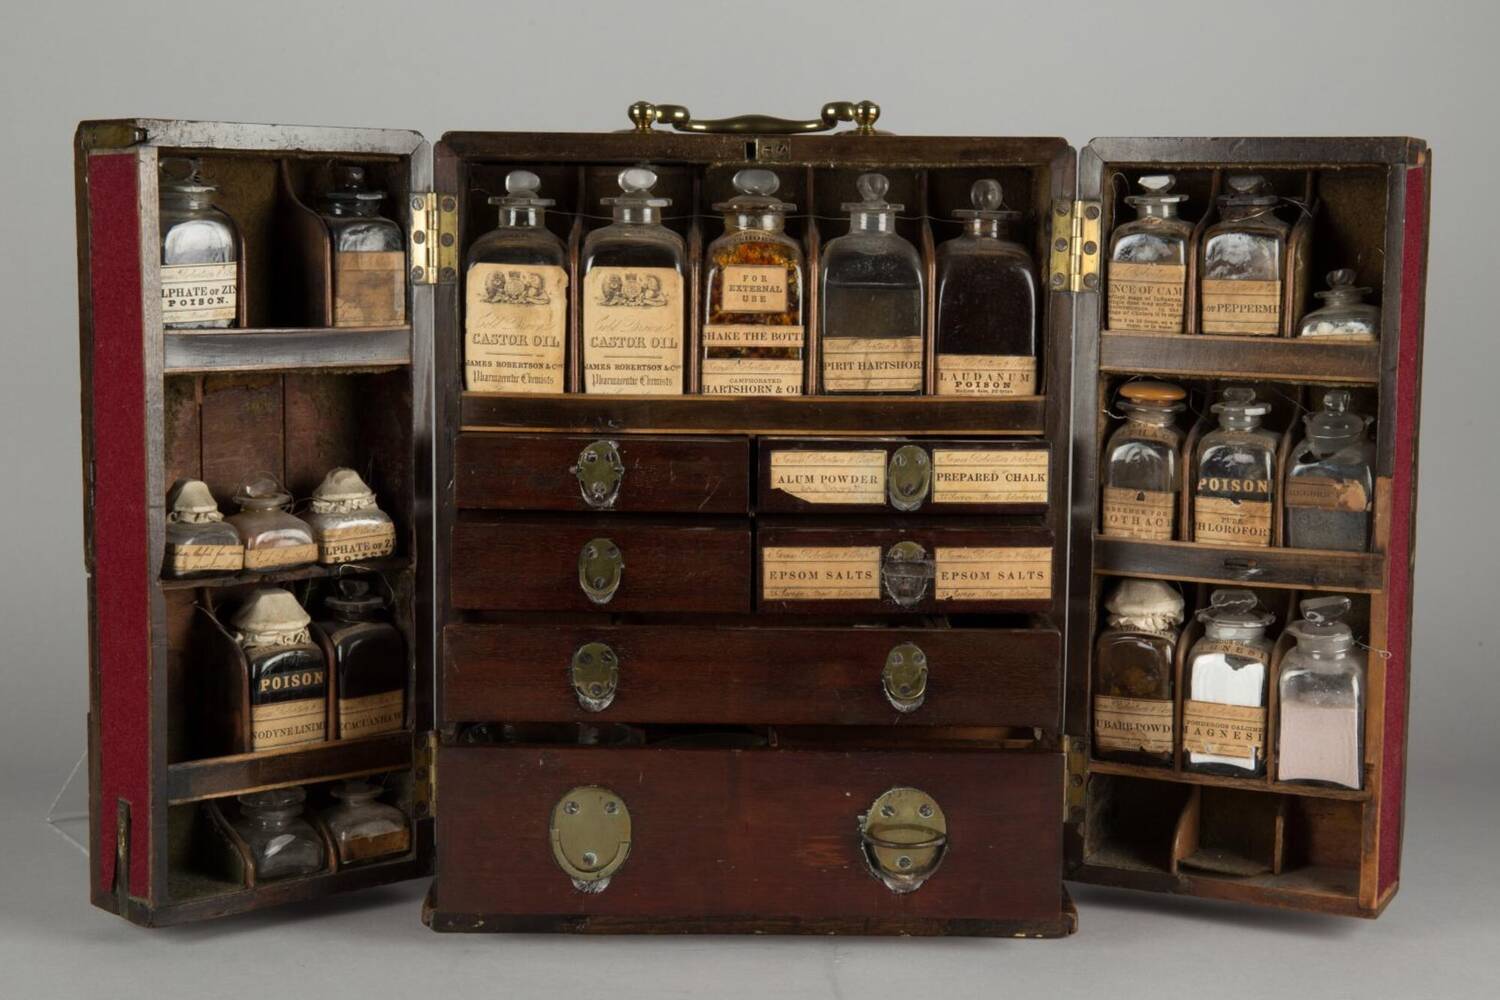 An old-fashioned medicine chest, which is open to show the different bottles and packages containing various 'cures'.